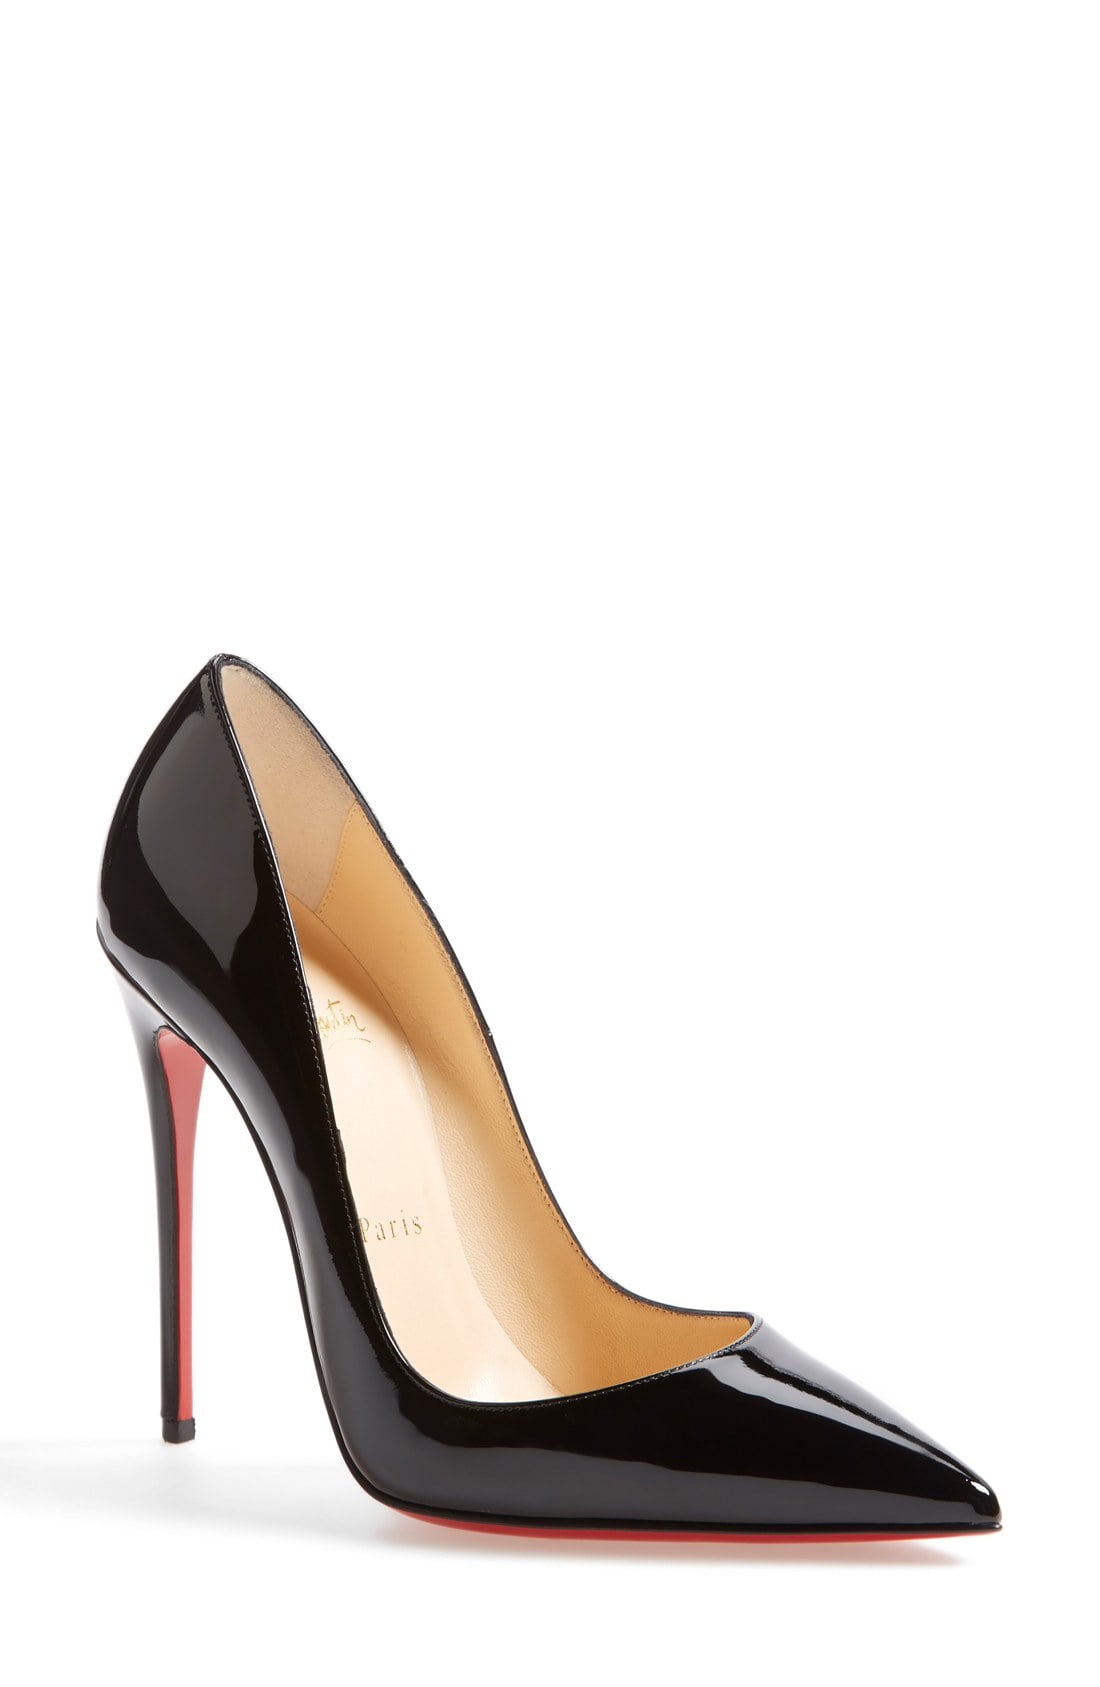 Women’s Christian Louboutin So Kate Pointed Toe Pump, Size 5.5US ...